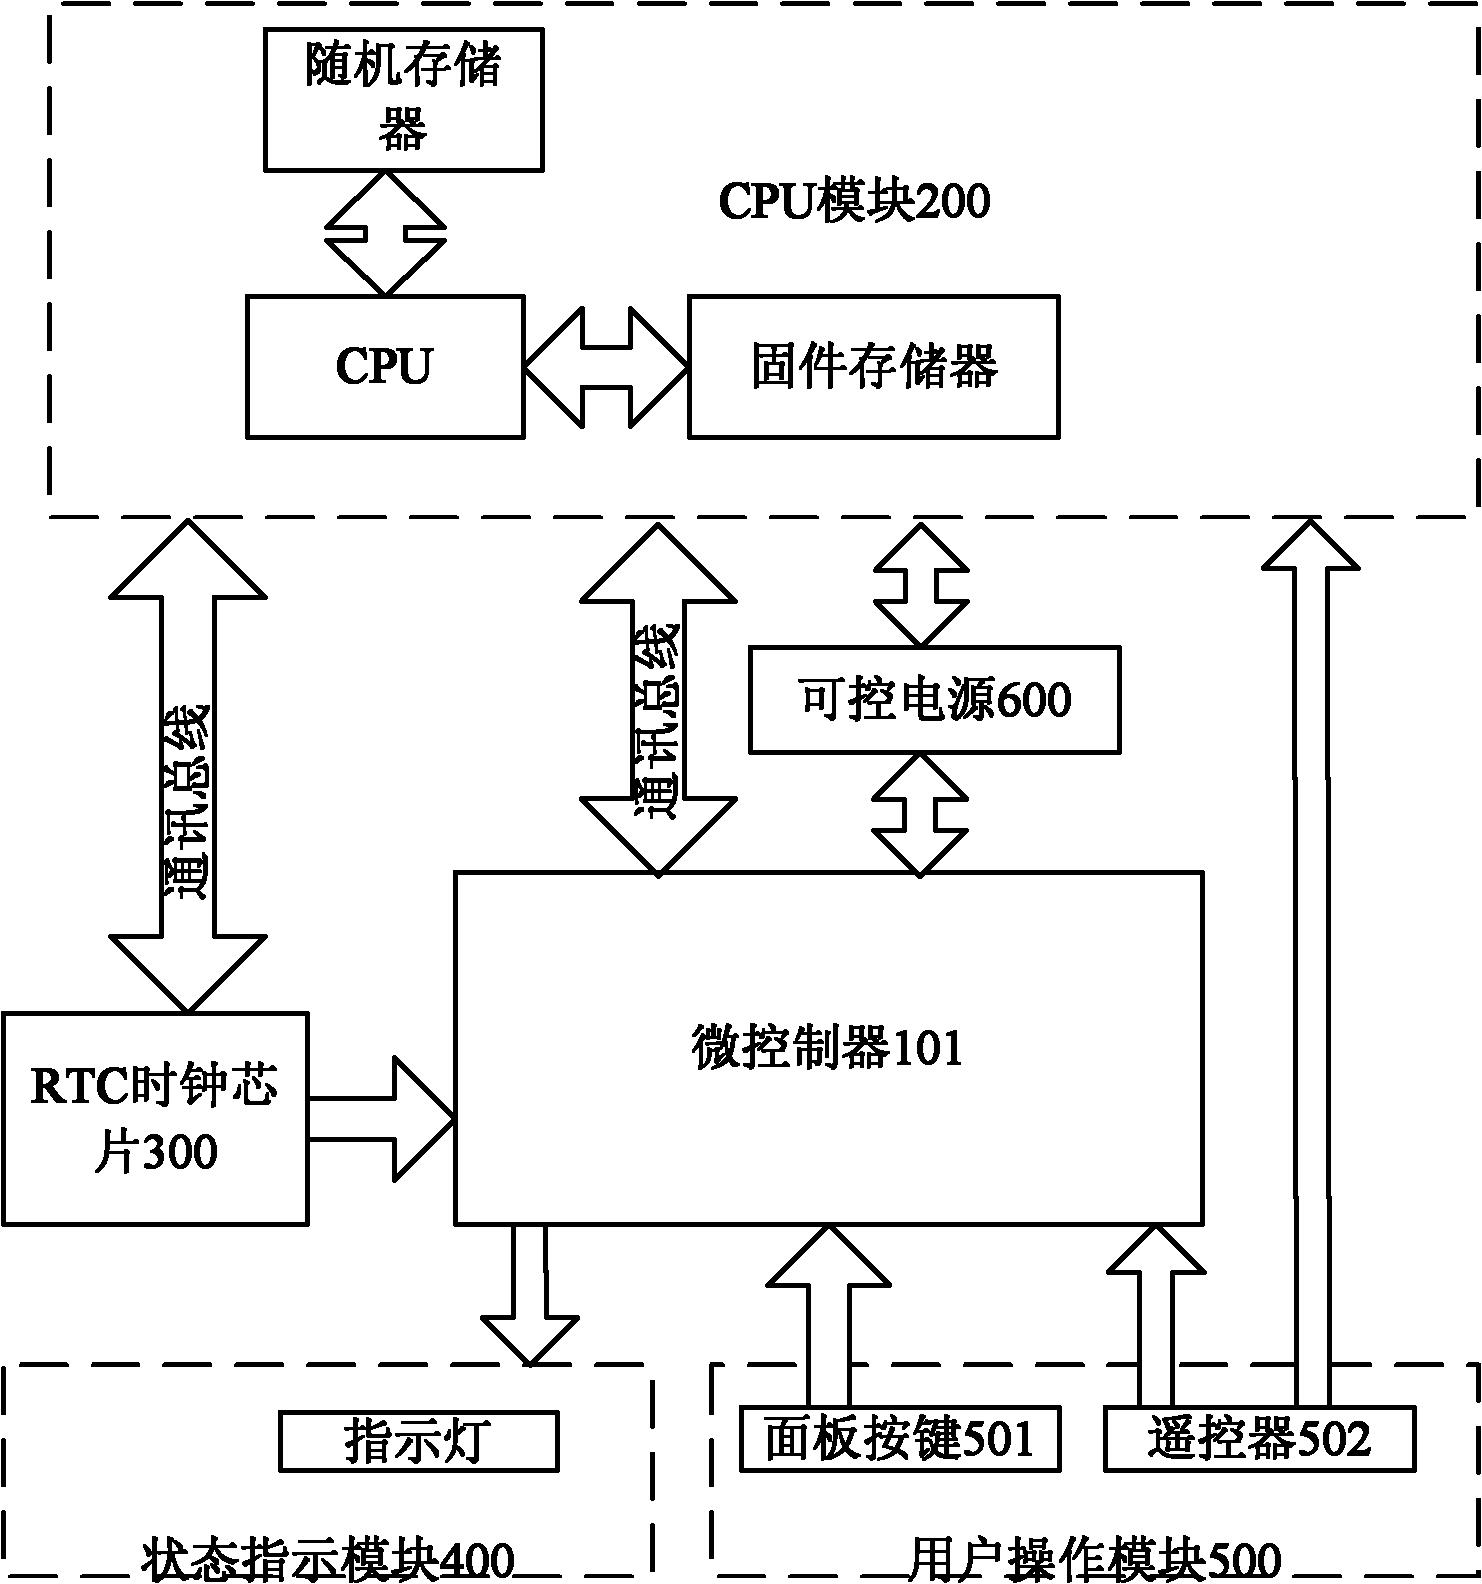 System for realizing standby and awakening of set top box by utilizing singlechip